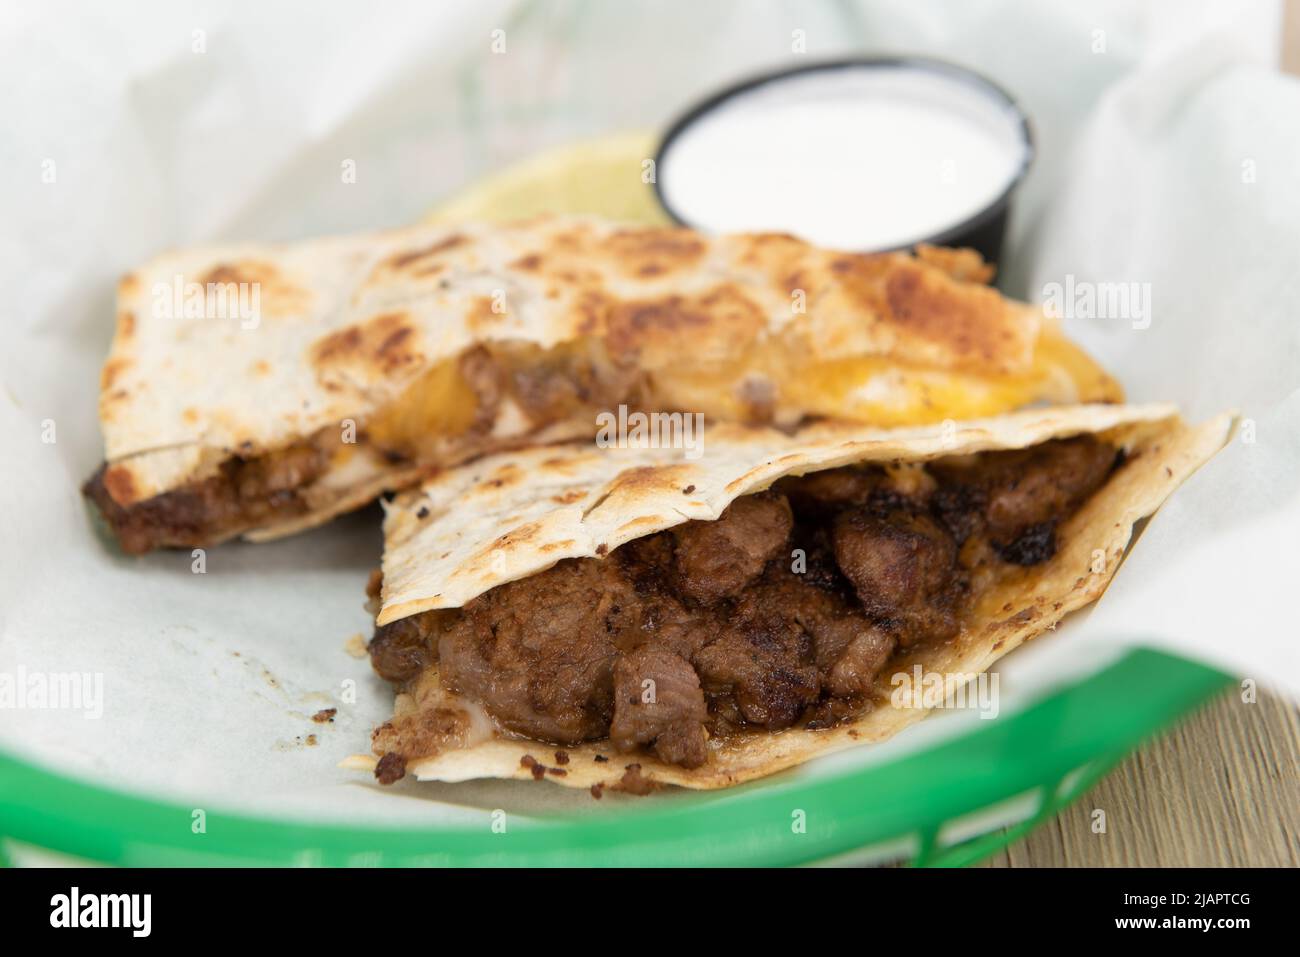 Tempting crispy fried asada quesadilla loaded with grilled steak meat and cut into triangle pieces to eat. Stock Photo